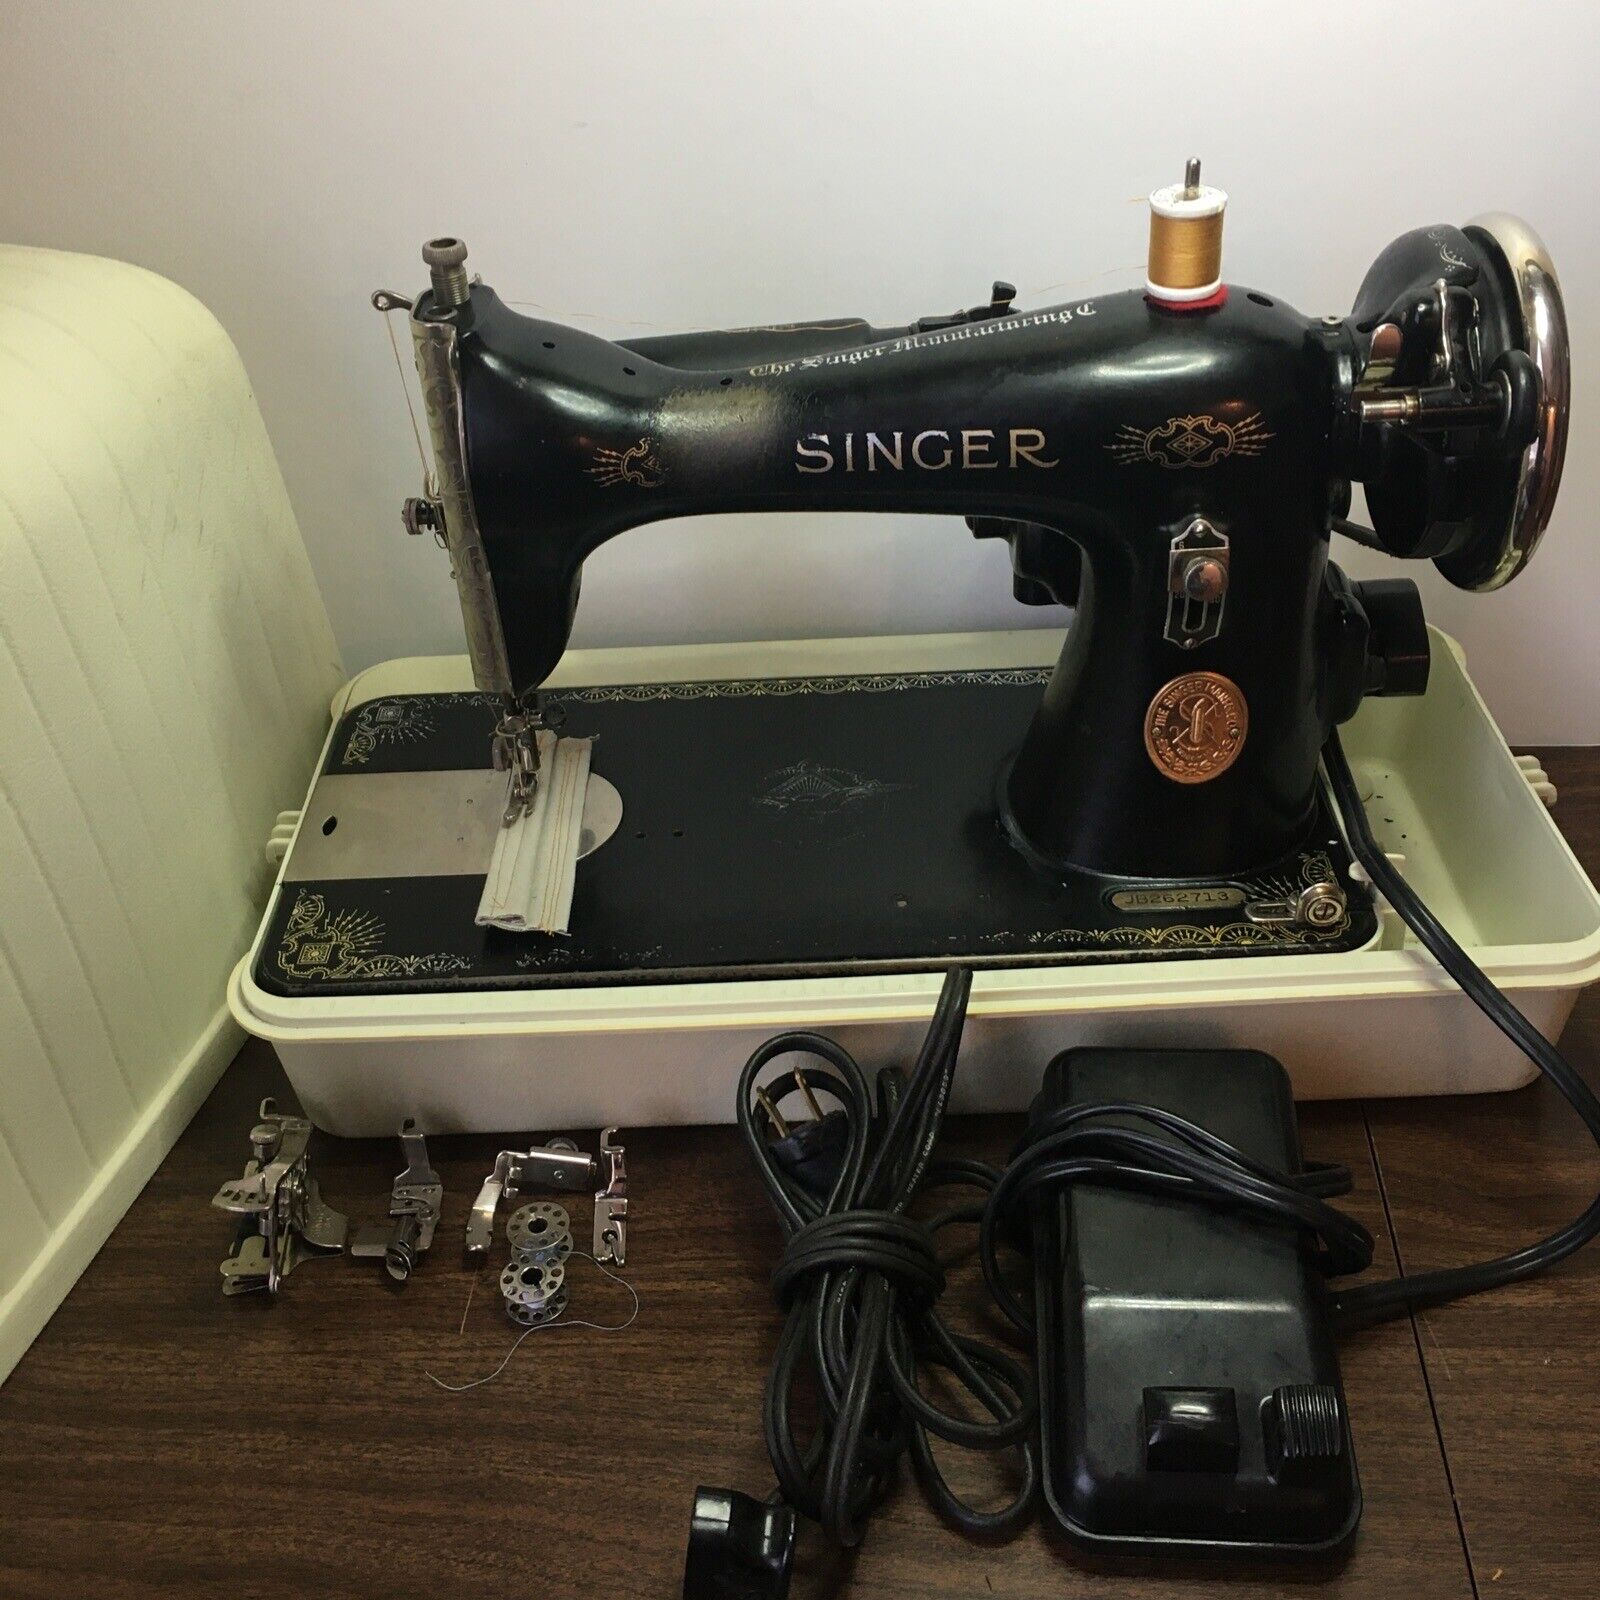 Singer Sewing Machine 15-97 JB262713, 1937 W/Carrying Case Sew Perfect Stitches